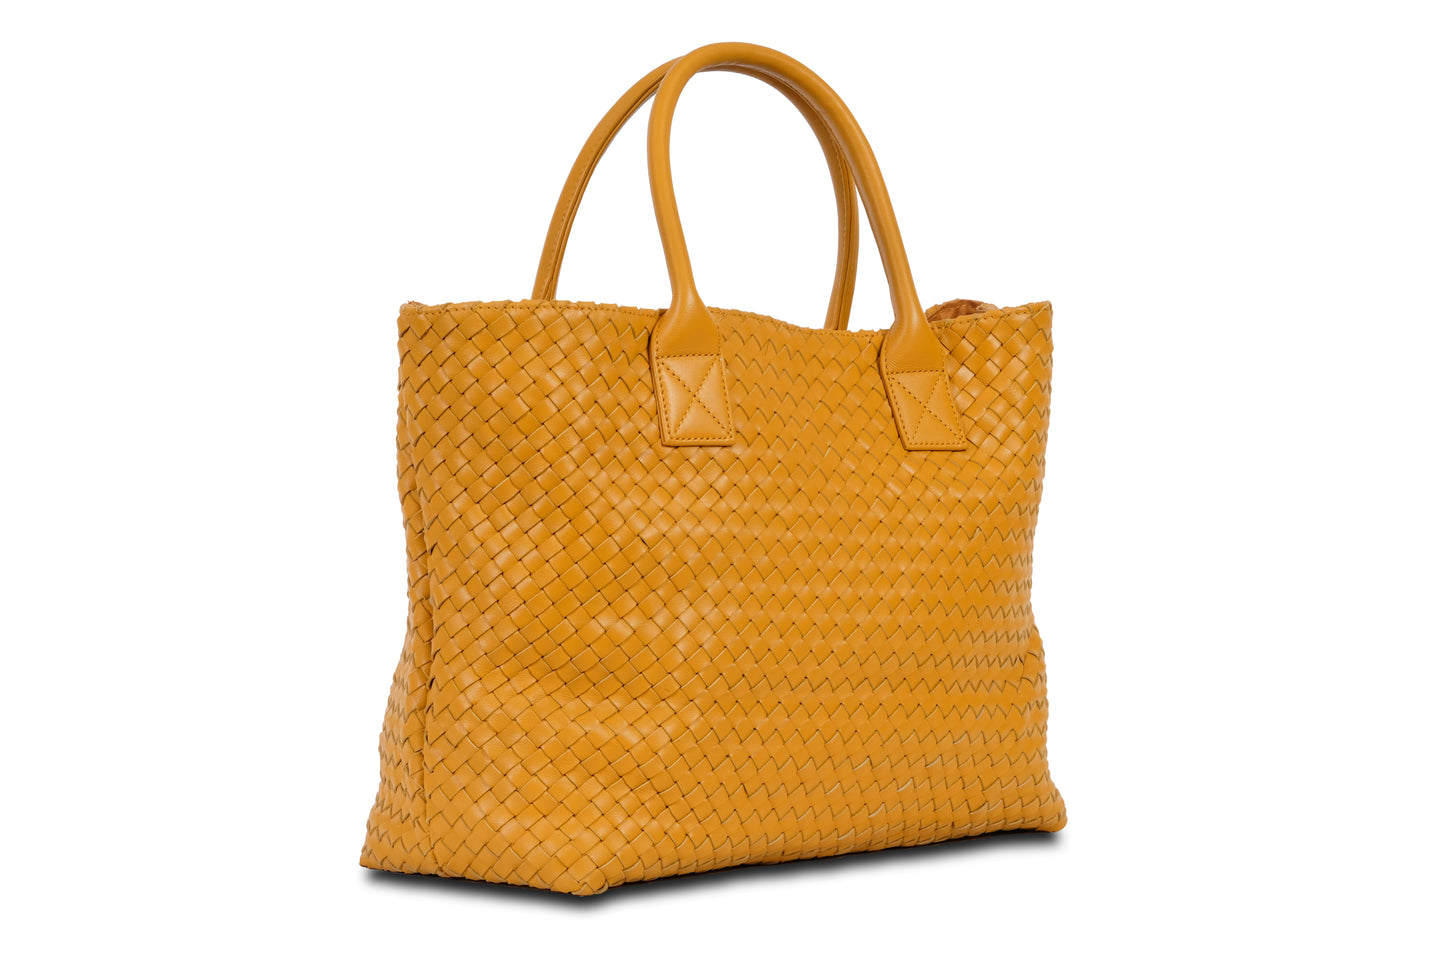 Destarina Autumn Yellow Crosshatch Leather Tote Bag Handbag made by Dewi Maya side view available at the best boutique in Upstate South Carolina Spartanburg Greenville Dewi Maya Boutique